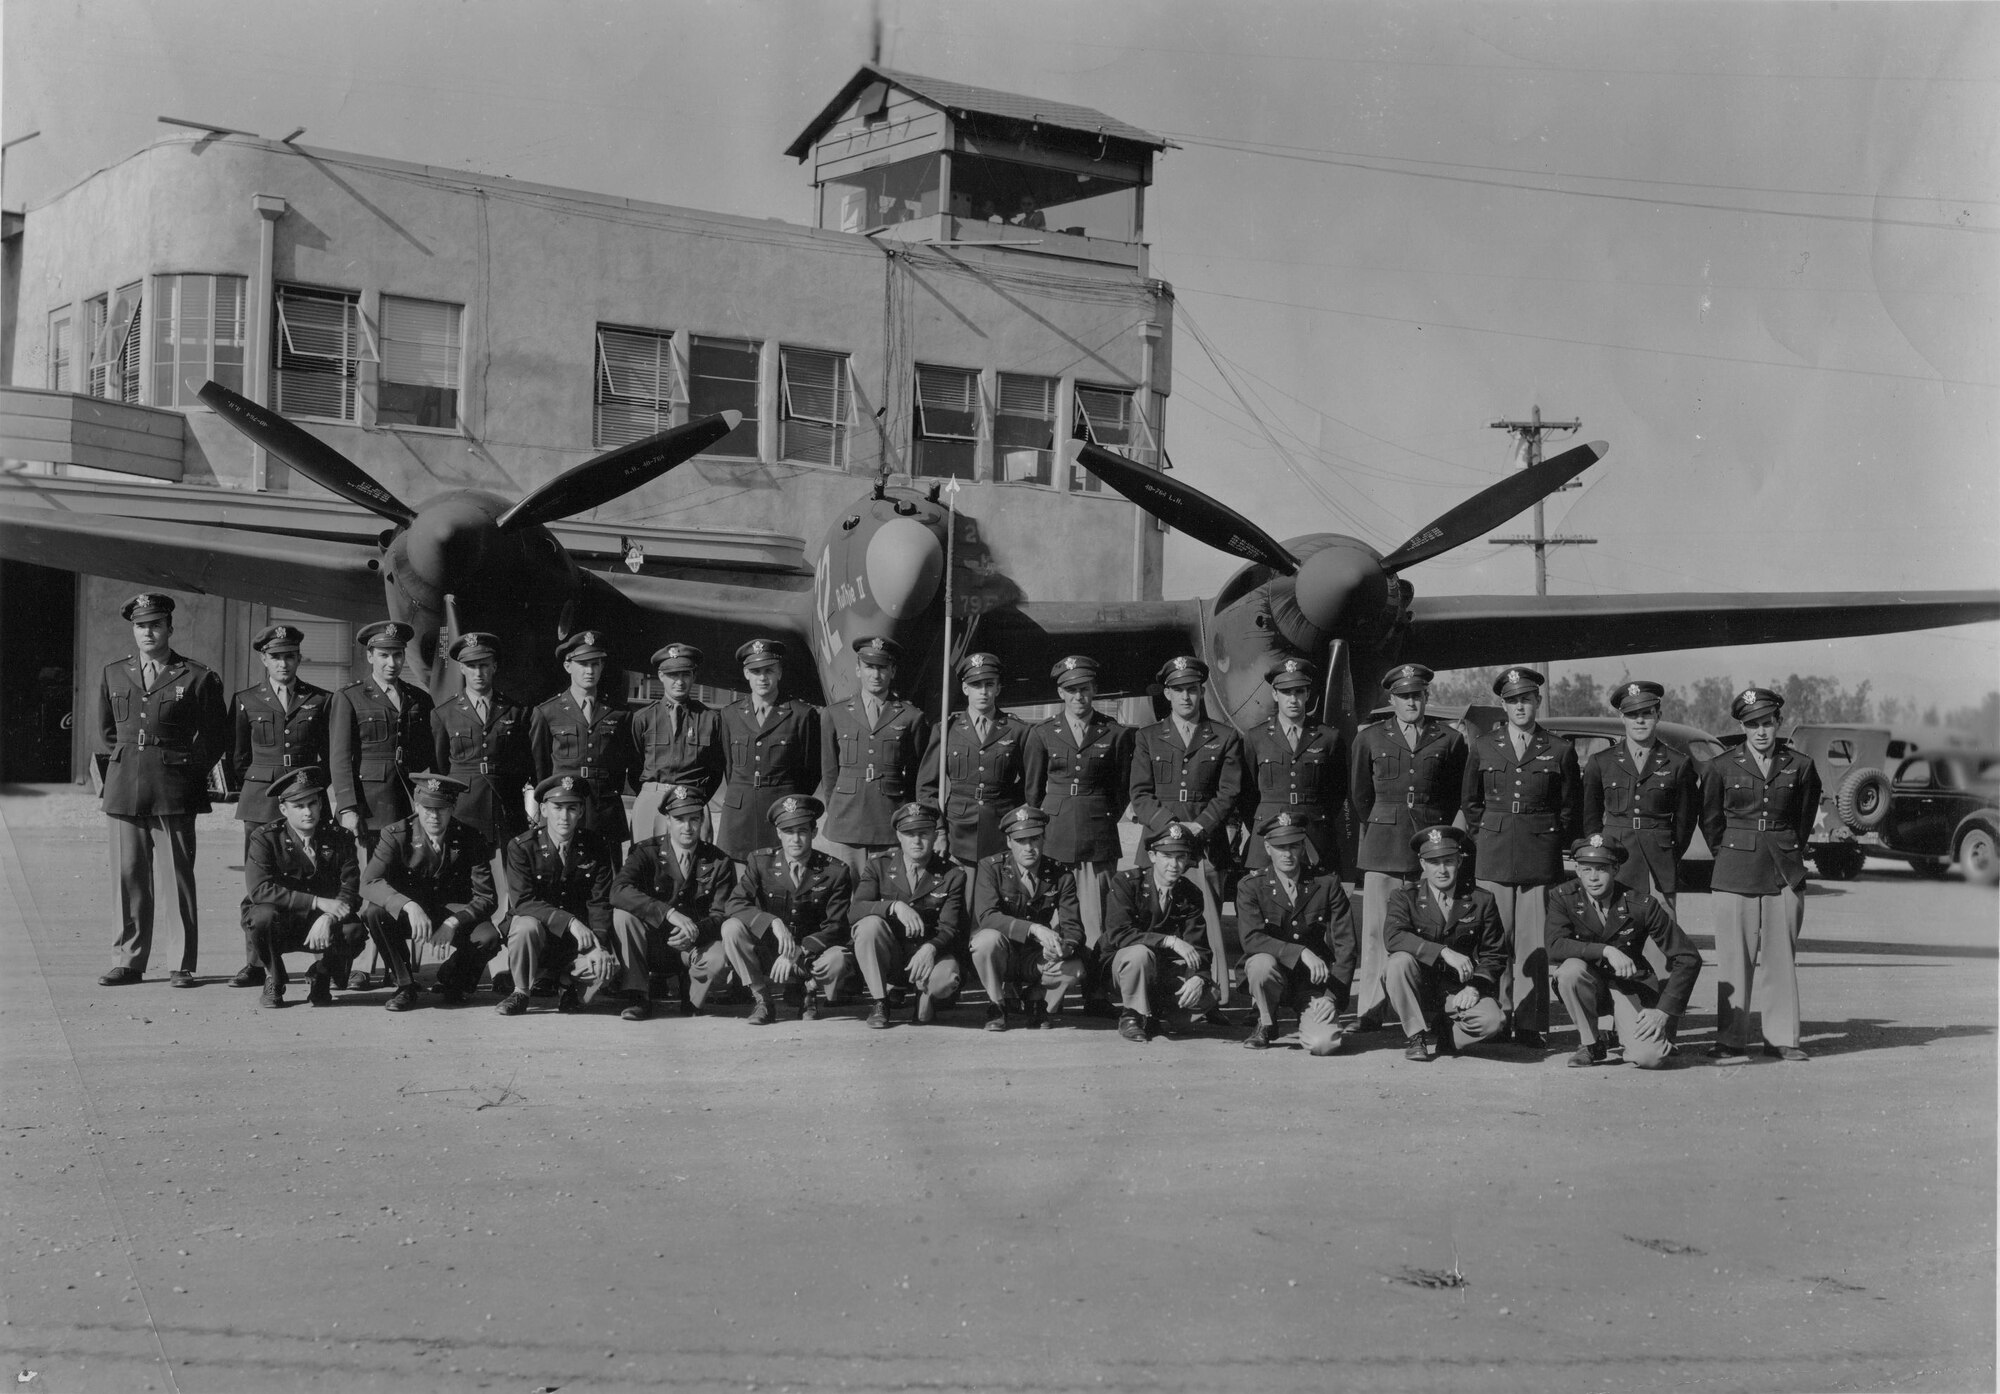 U.S. Army Air Corps pilots assigned to the 79th Fighter Squadron pose in front of a P-38 Lightning at Ontario, Calif., in 1943.